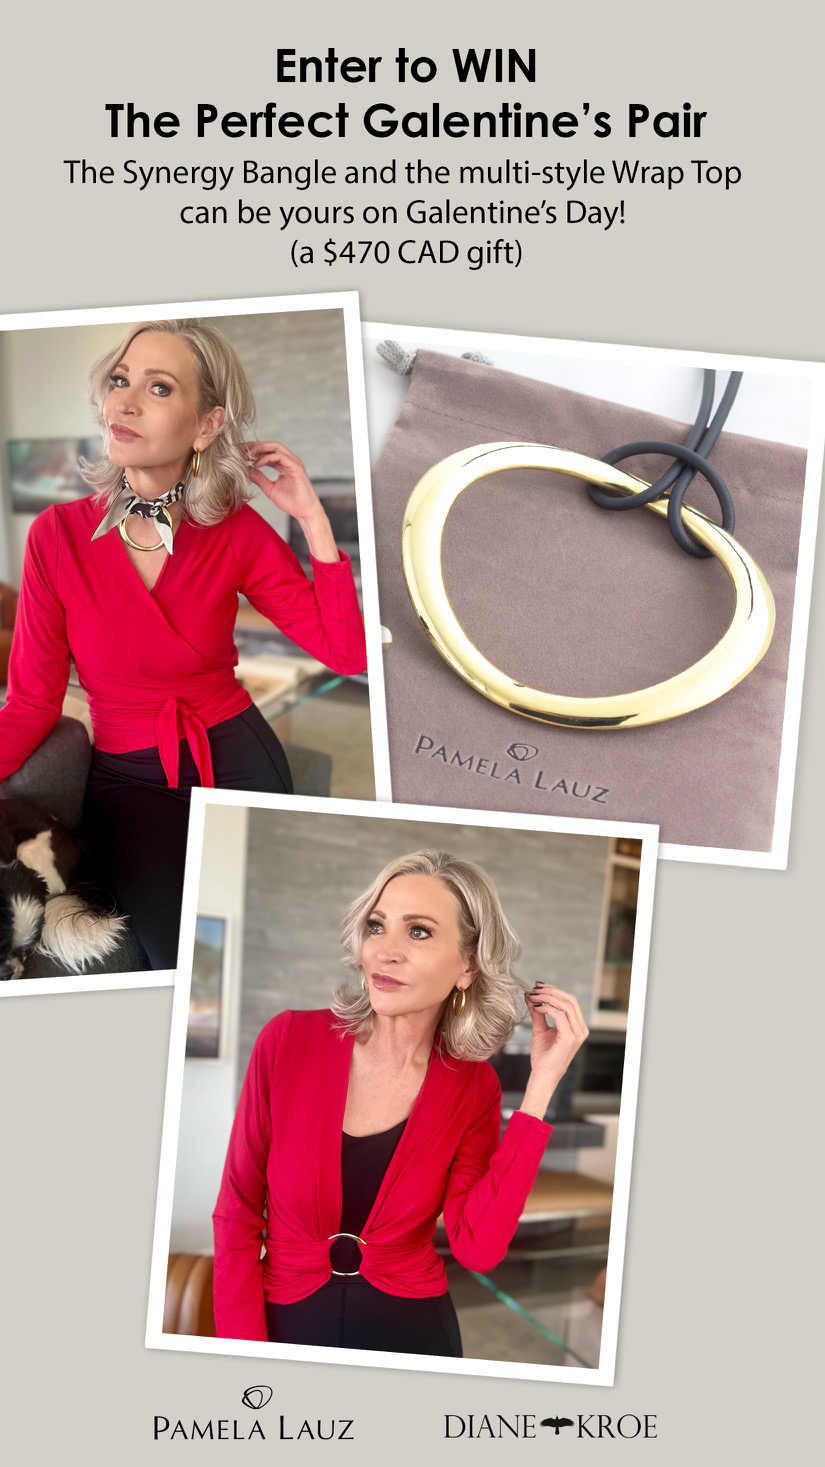 More Than Turquoise and  Diane Kroe wrap top & Pamela Lauz Synergy bangle for galentine's Day Giveaway 